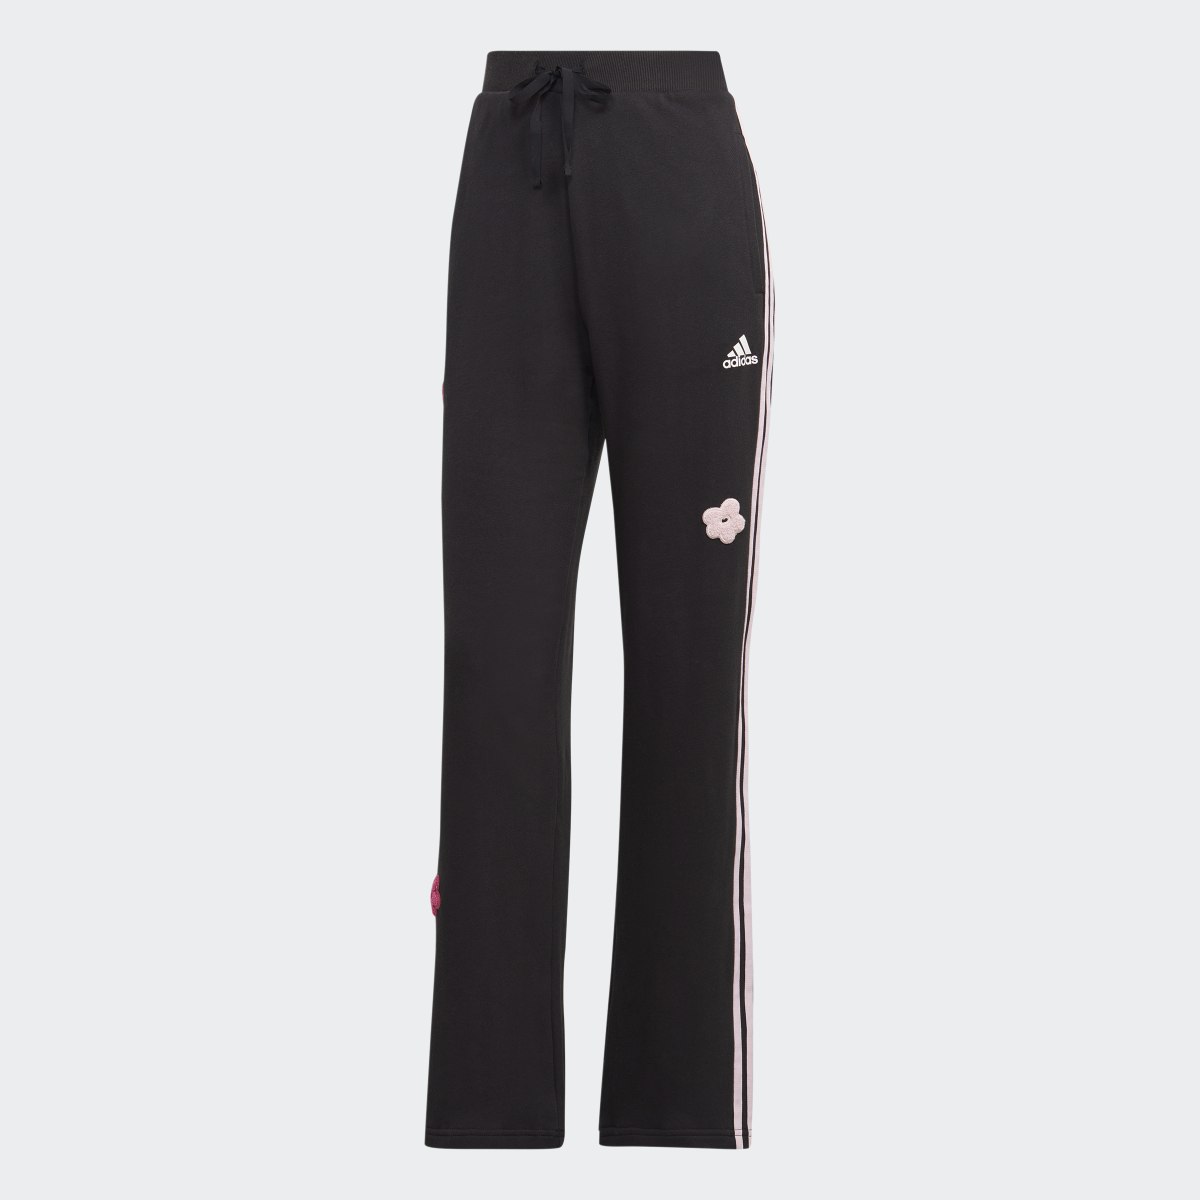 Adidas 3-Stripes High Rise Joggers with Chenille Flower Patches. 4